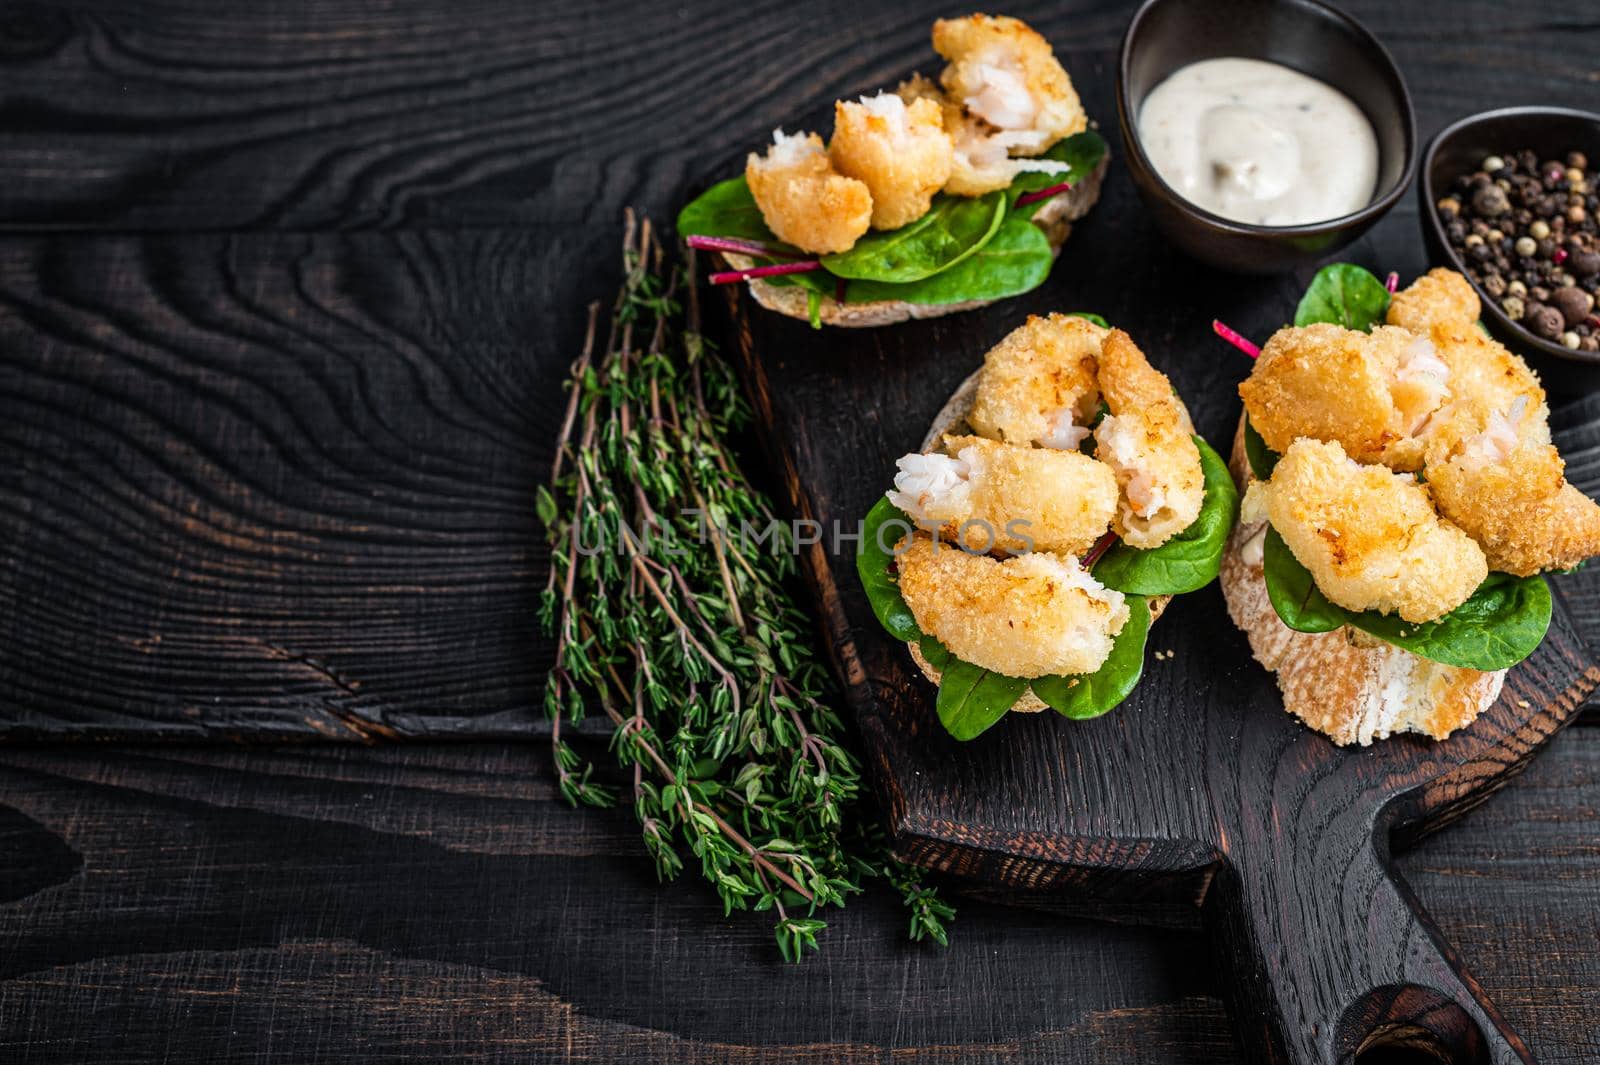 Toasts with Crispy Fried Shrimps Prawns and green salad on a wooden board. Black wooden background. Top view. Copy space by Composter